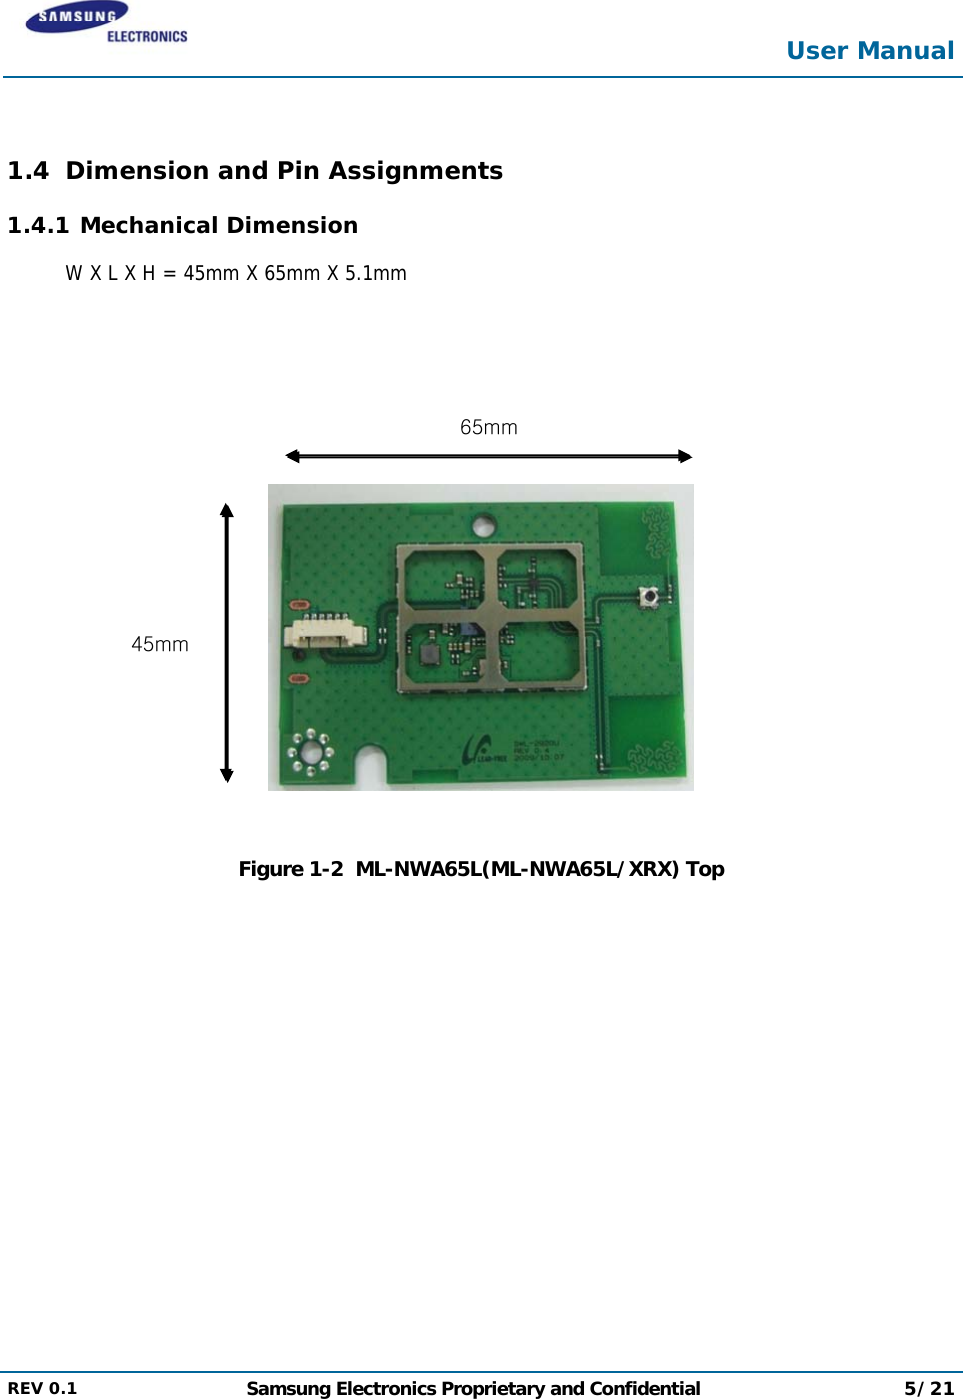  User Manual  REV 0.1  Samsung Electronics Proprietary and Confidential 5/21   1.4 Dimension and Pin Assignments 1.4.1 Mechanical Dimension W X L X H = 45mm X 65mm X 5.1mm         Figure 1-2  ML-NWA65L(ML-NWA65L/XRX) Top 45mm 65mm 